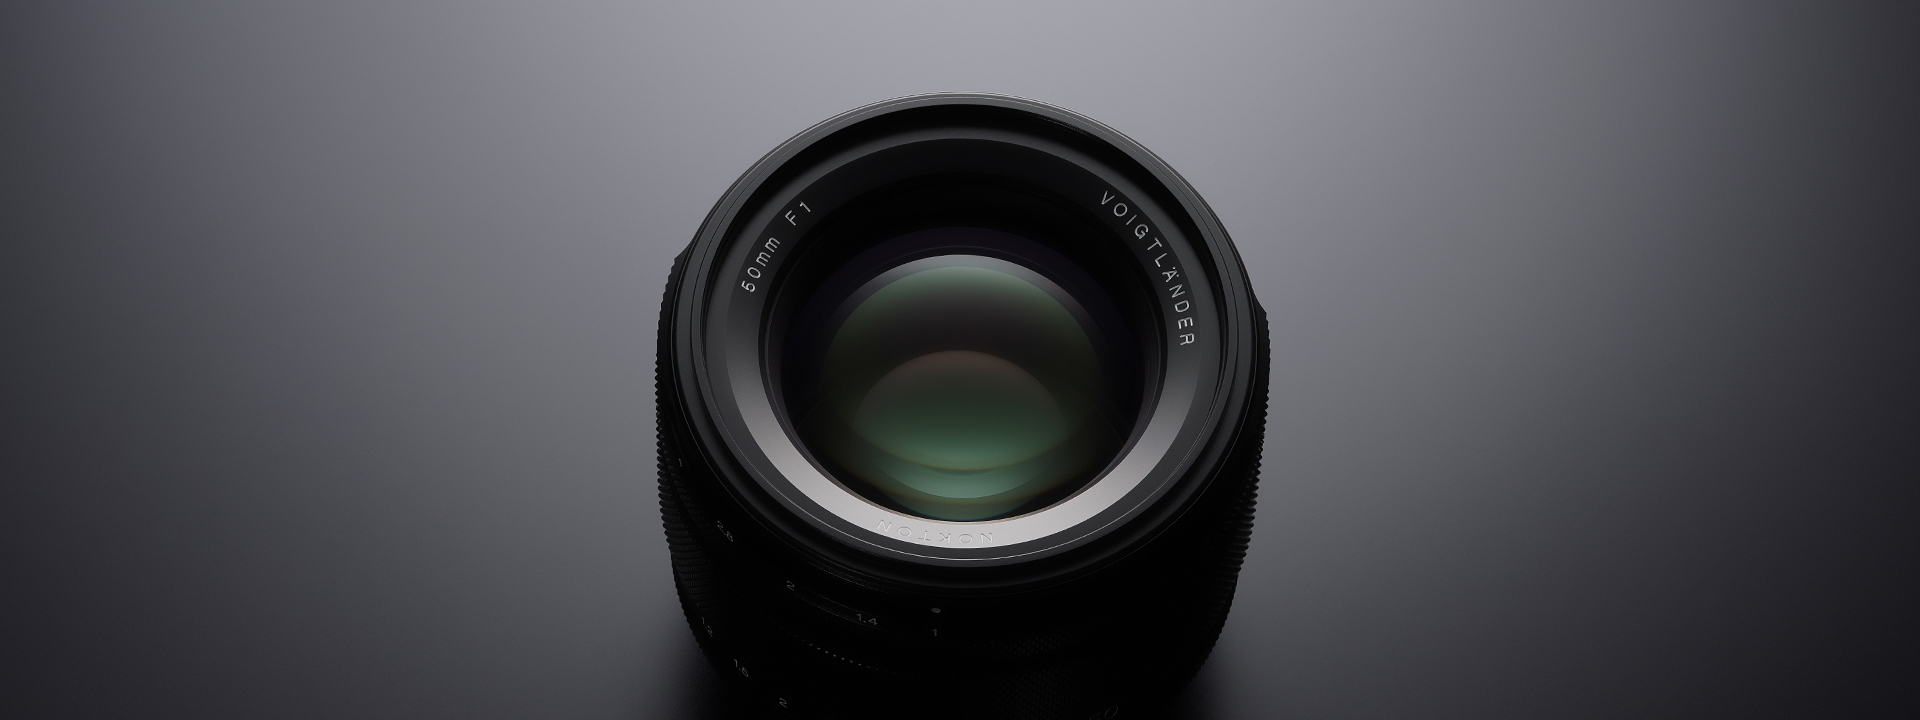 RF 50 10 03 - Voigtlander Nokton RF 50mm f/1 specifications and pricing released